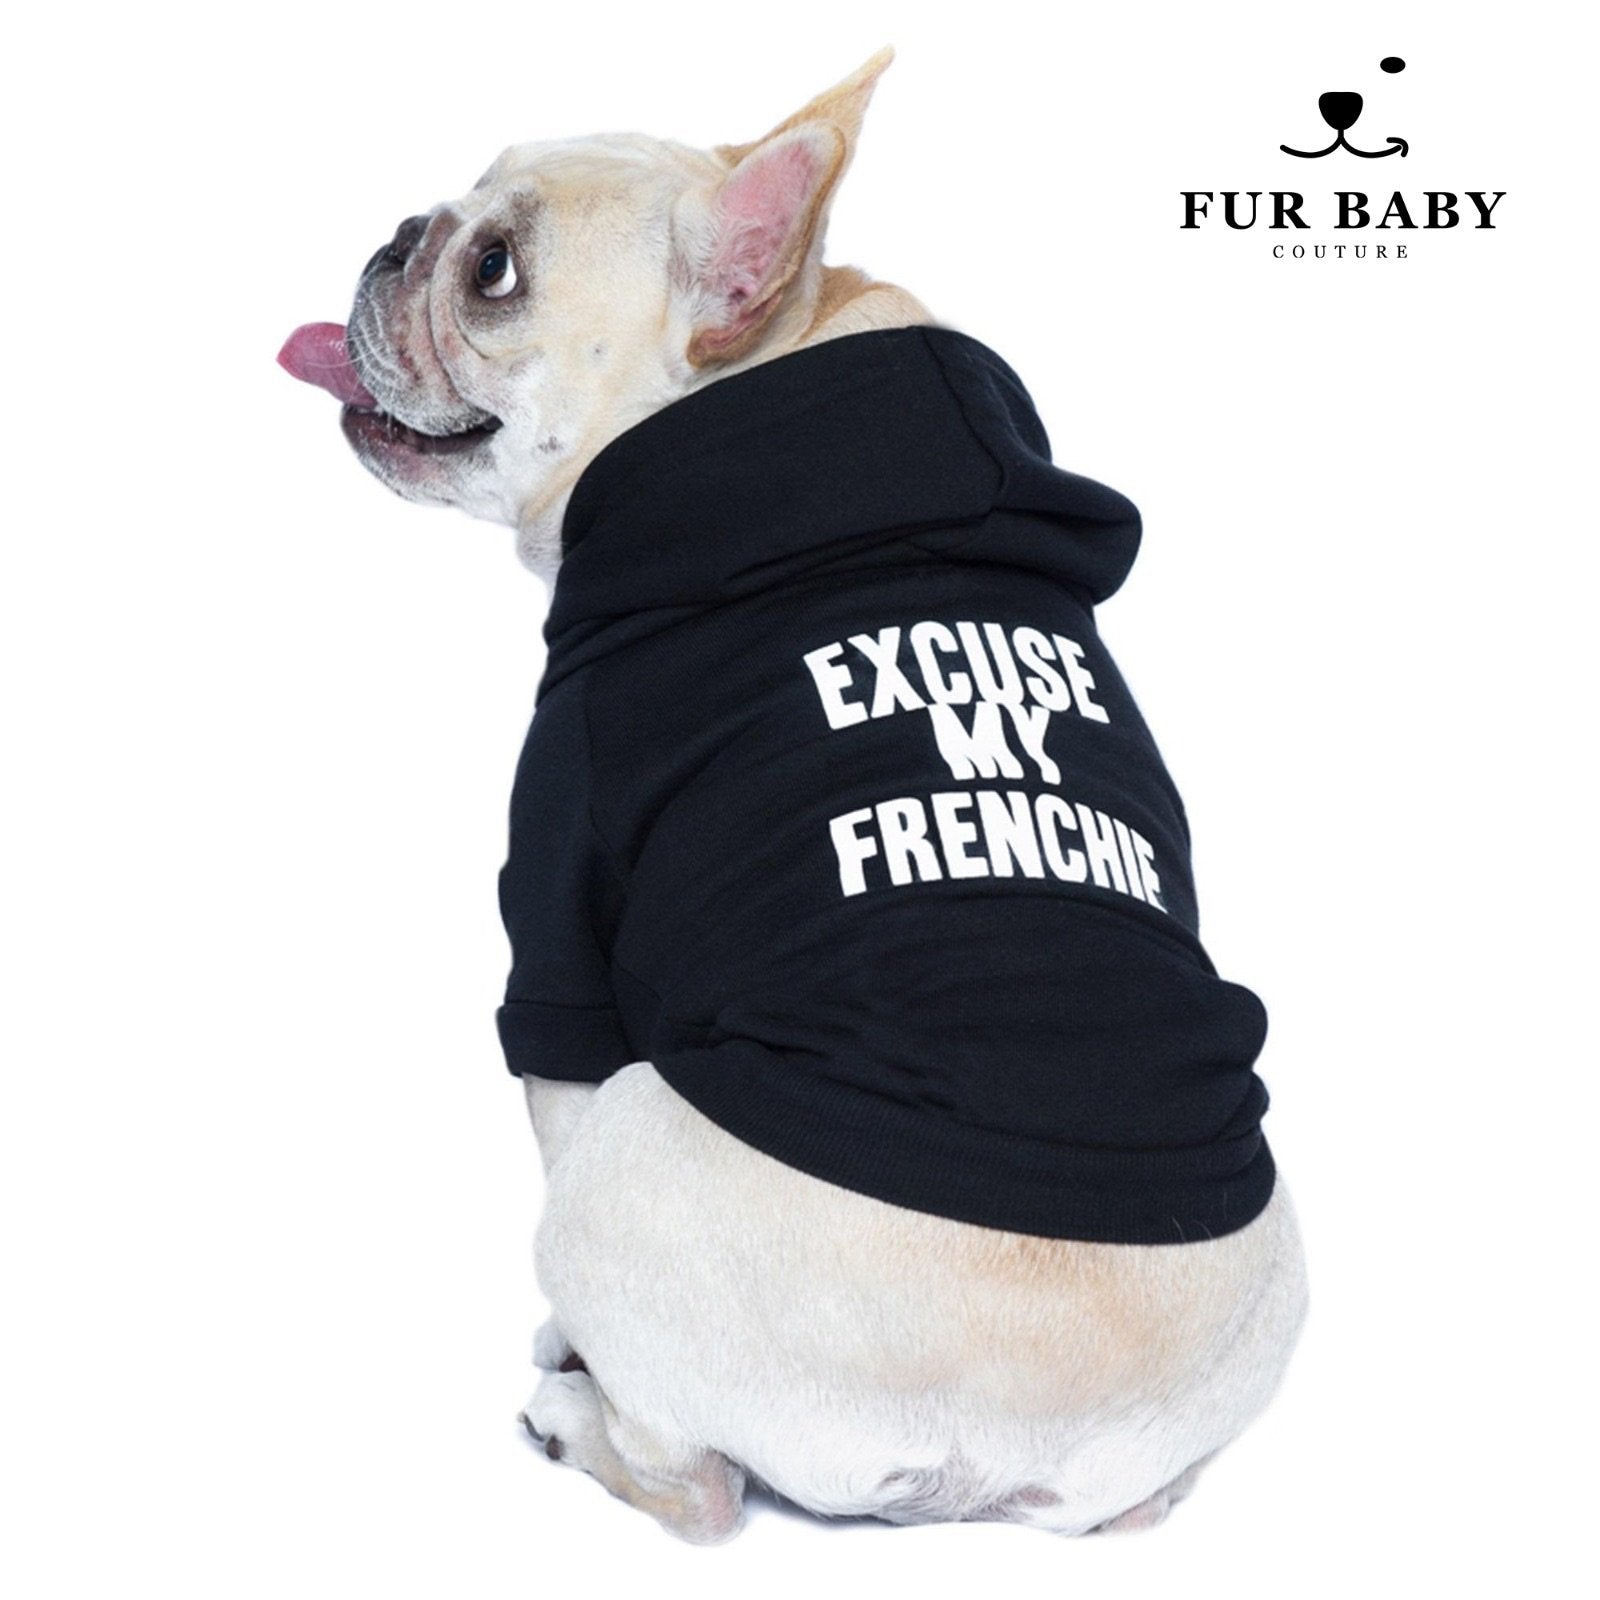 Frenchie - Furbaby Couture